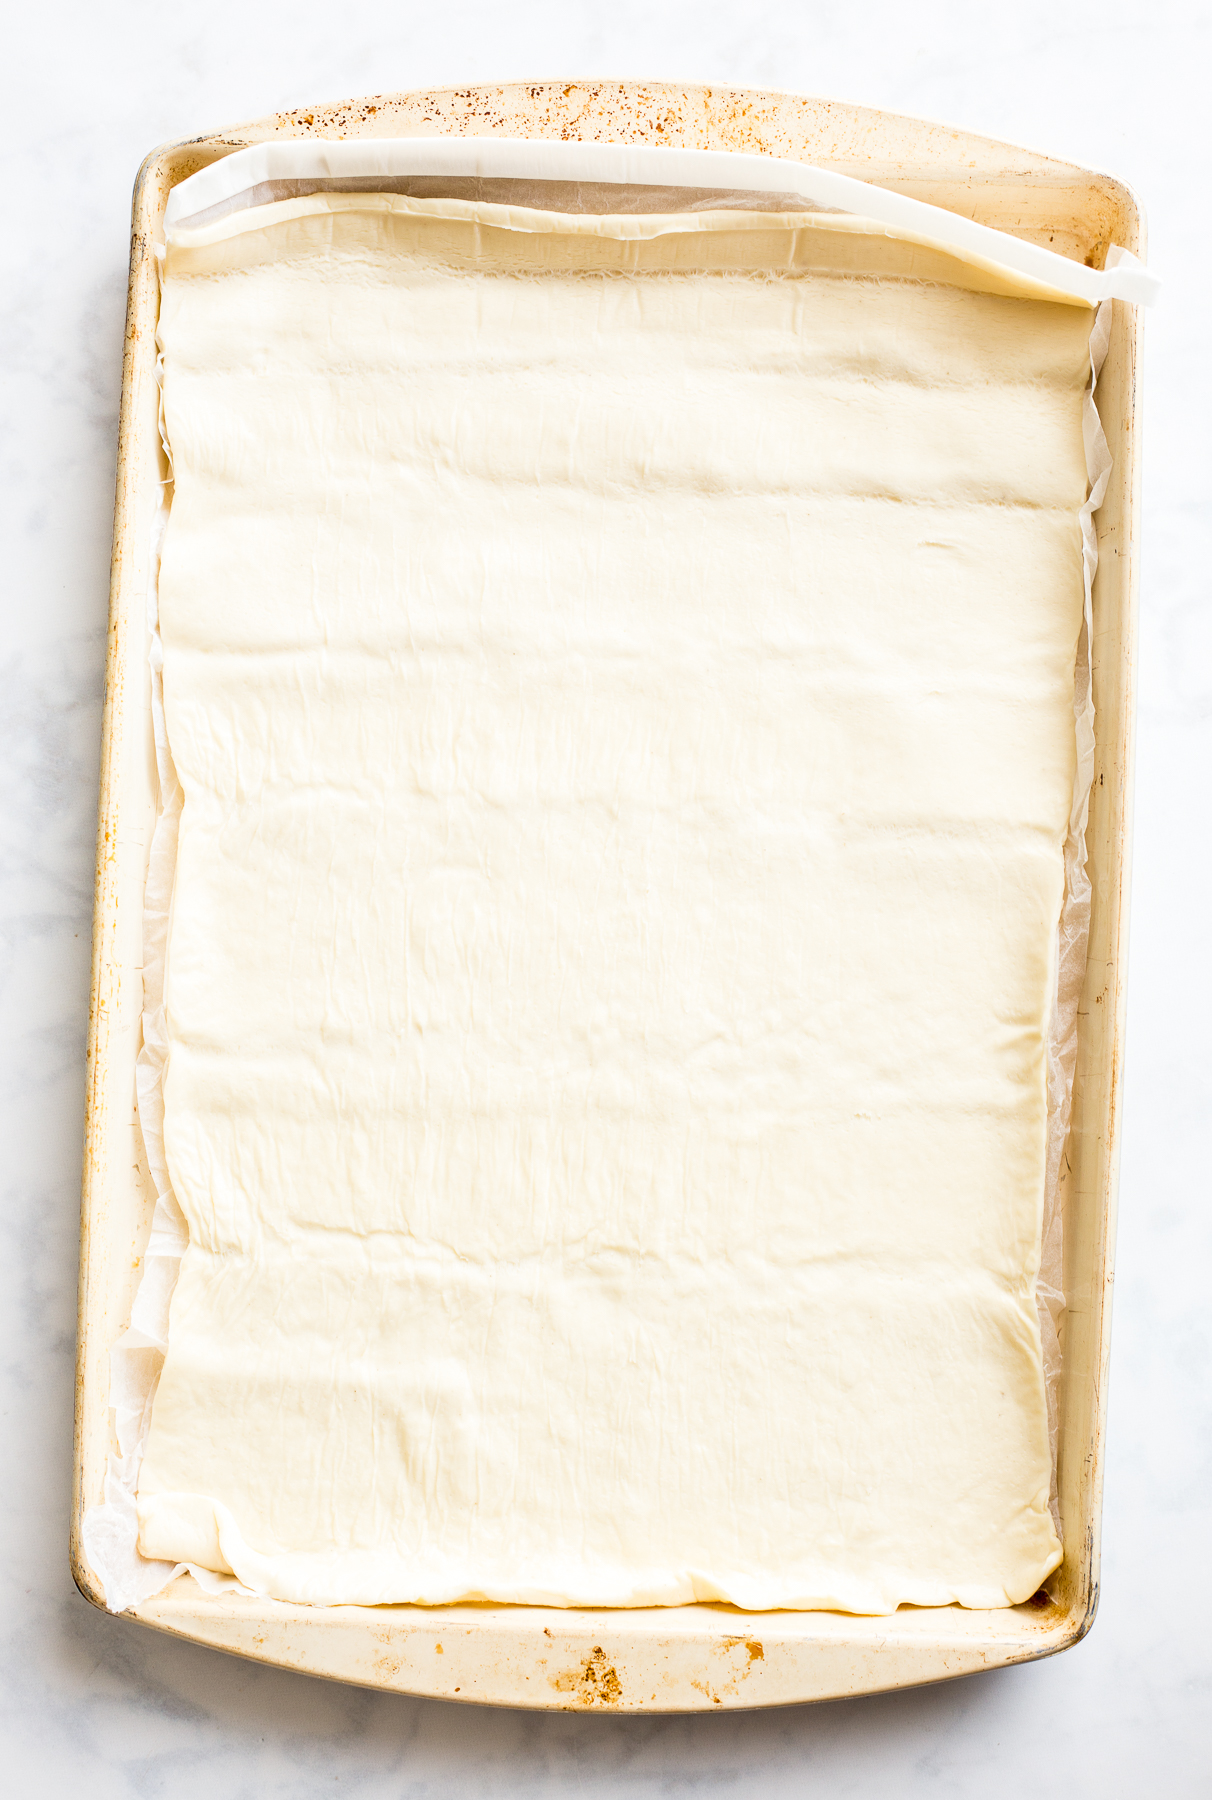 Sheet of Jus-Rol puff pastry sheet on a baking sheet